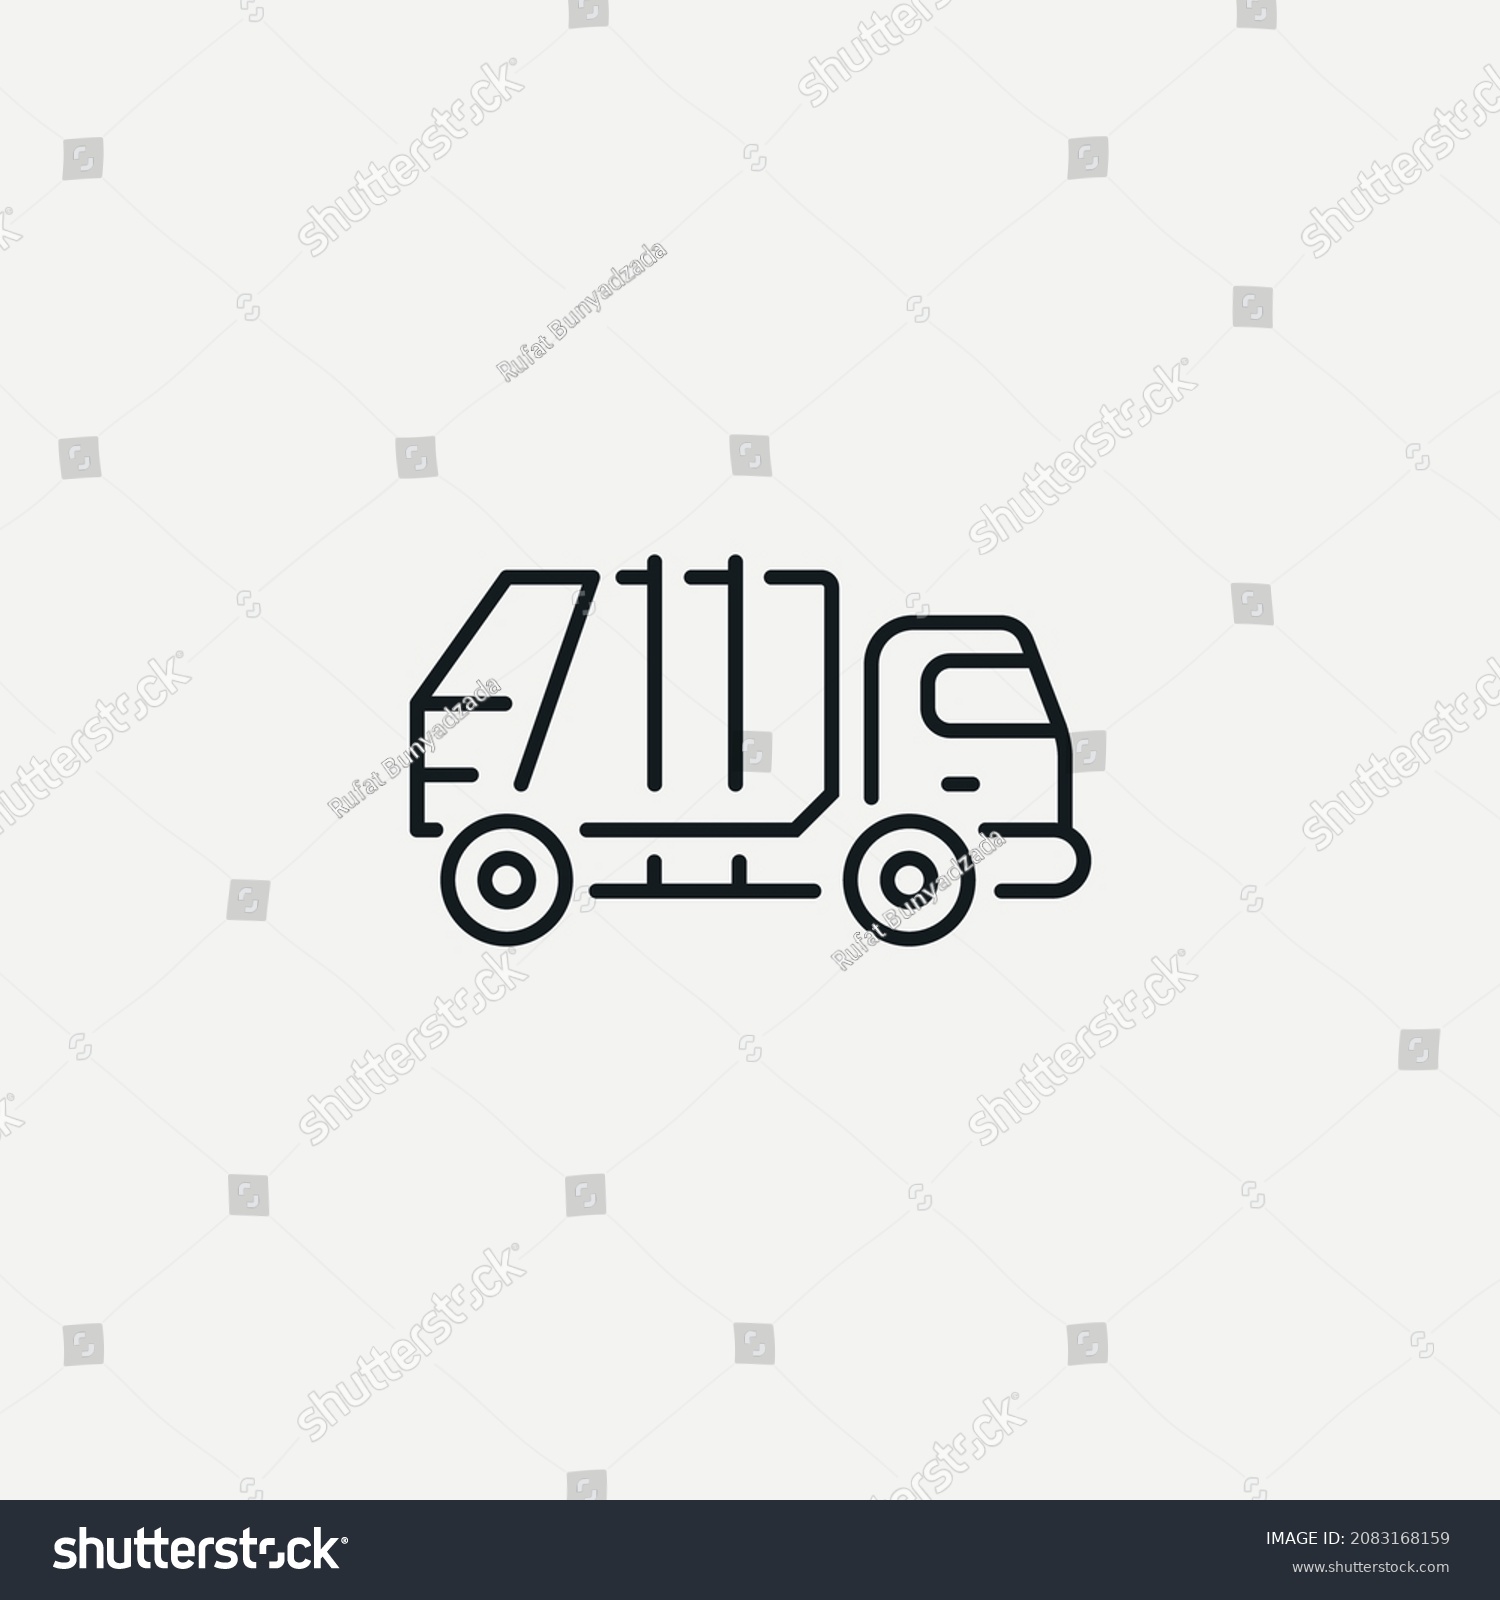 SVG of 
garbage truck  sign vector icon svg